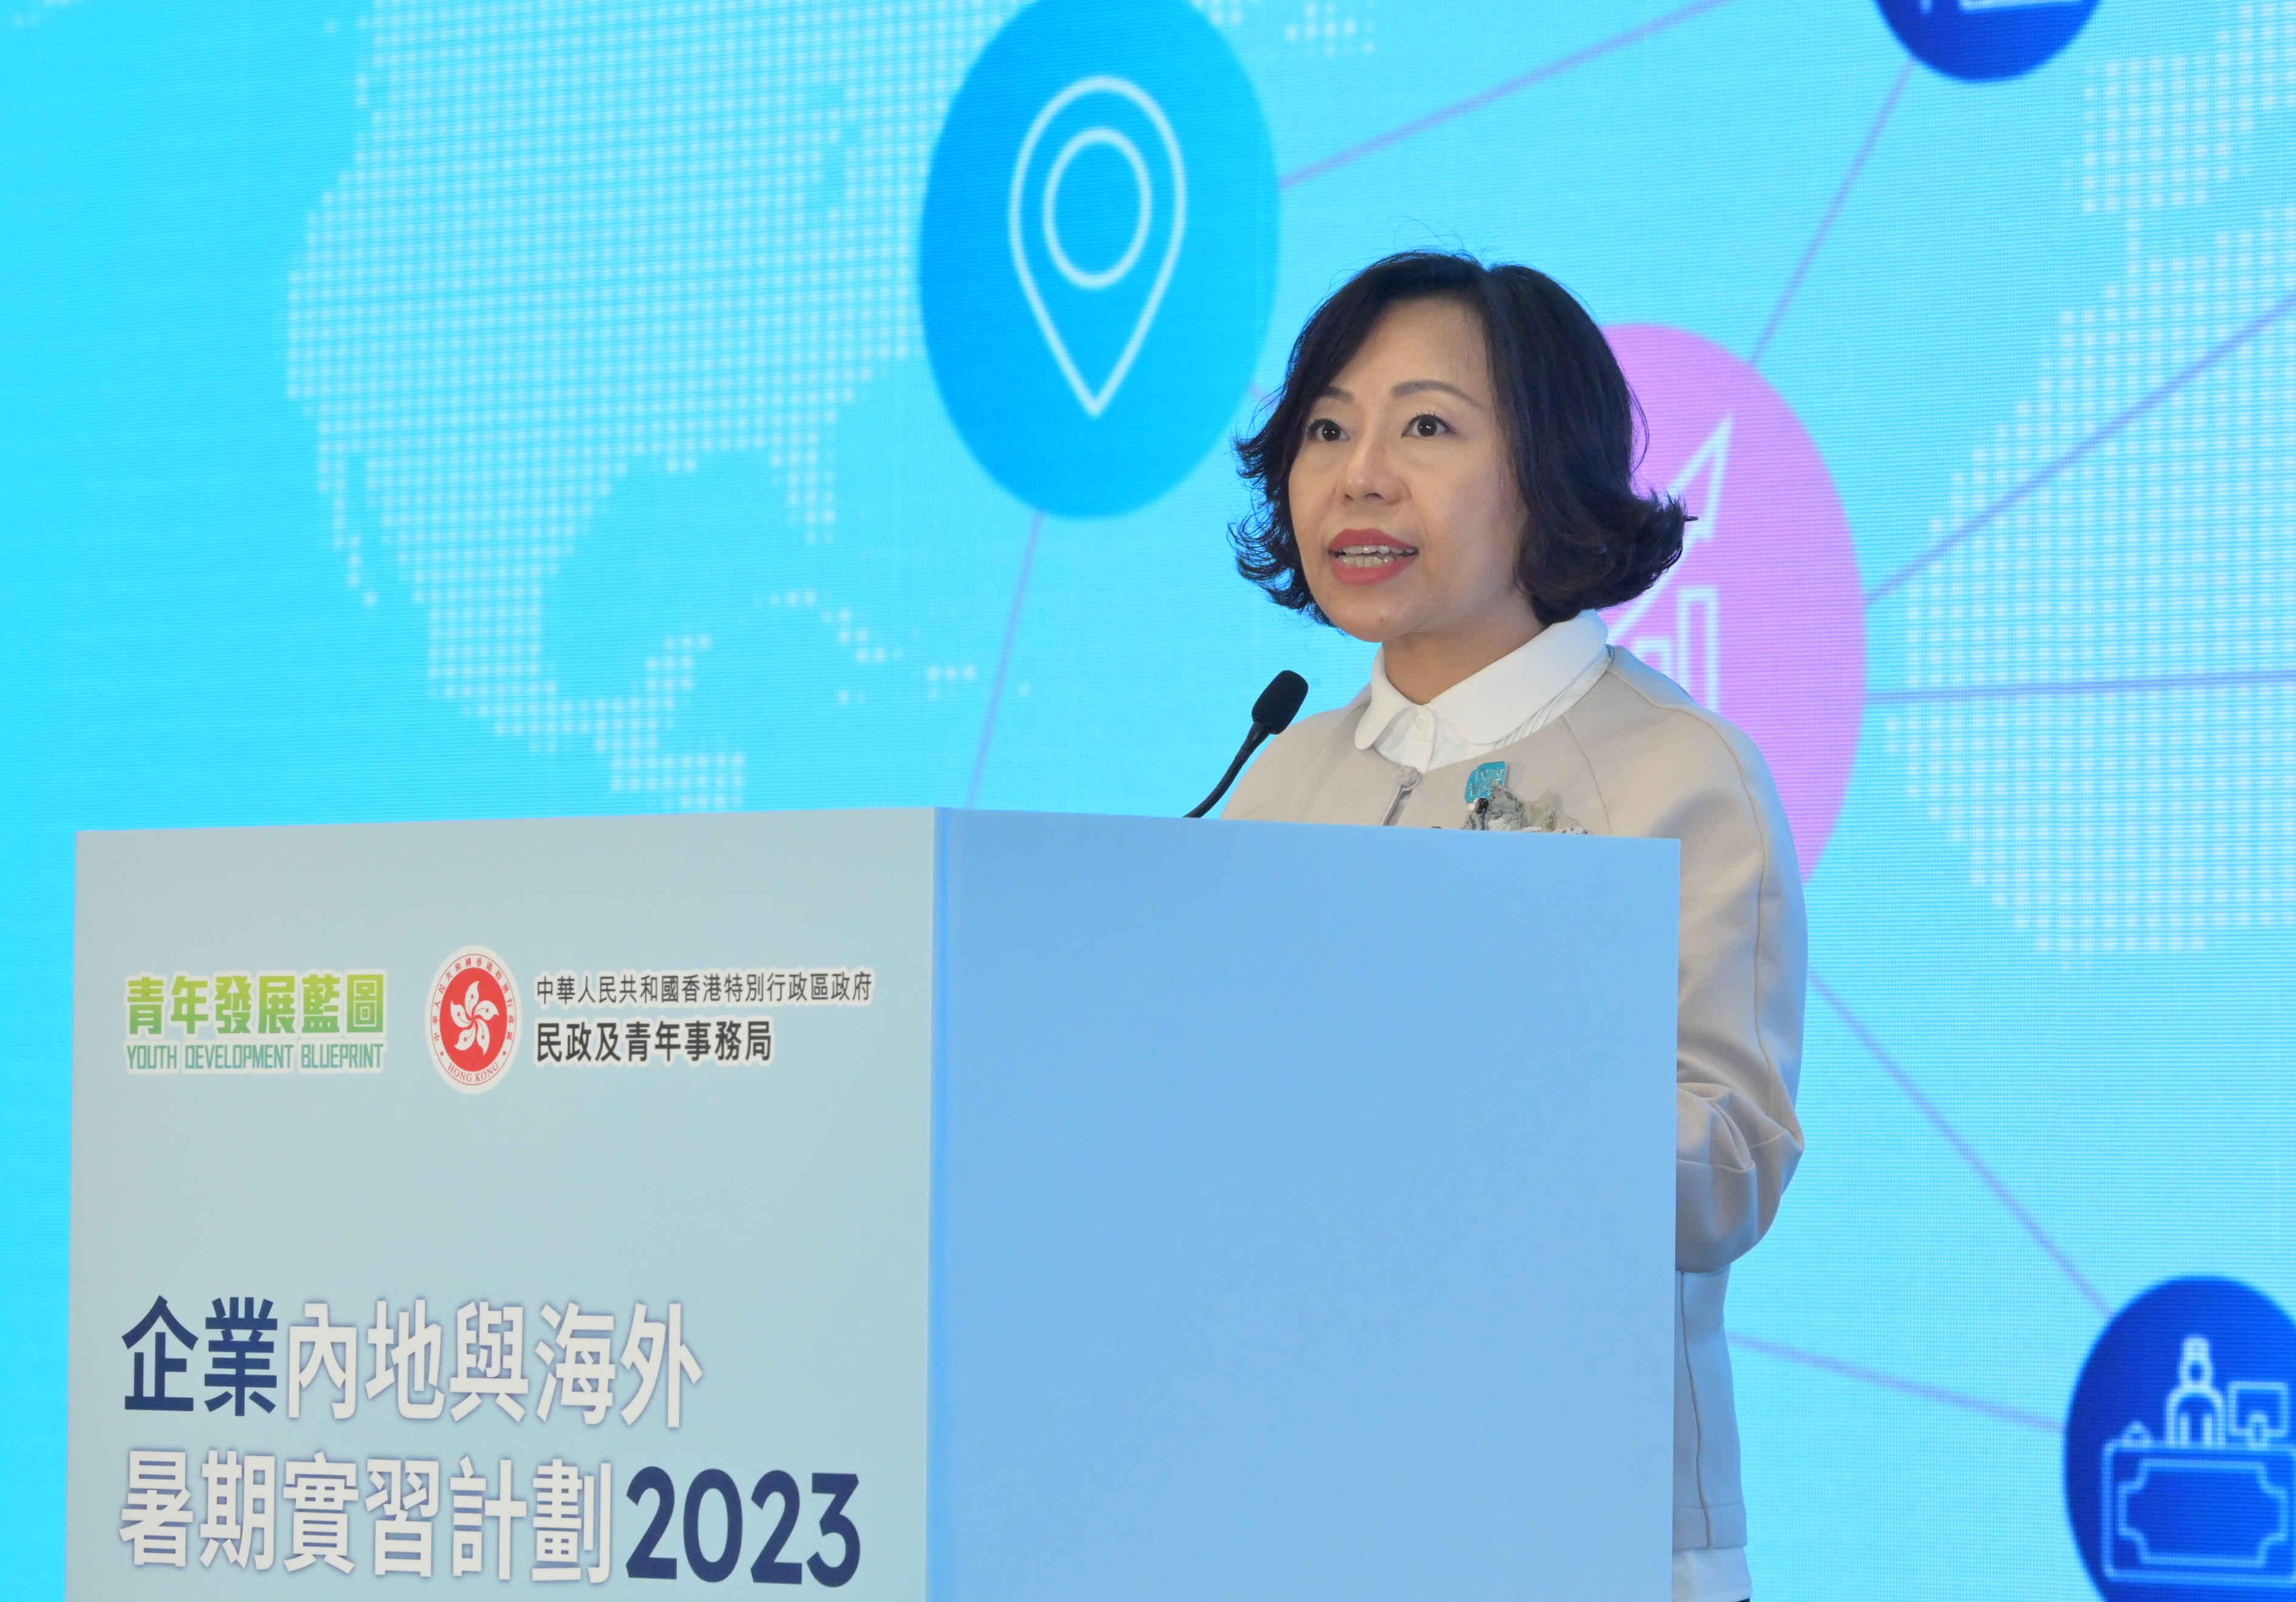 The kick-off ceremony of the Scheme on Corporate Summer Internship on the Mainland and Overseas 2023 was held today (June 5). Photo shows the Secretary for Home and Youth Affairs, Miss Alice Mak, delivering a speech at the ceremony.